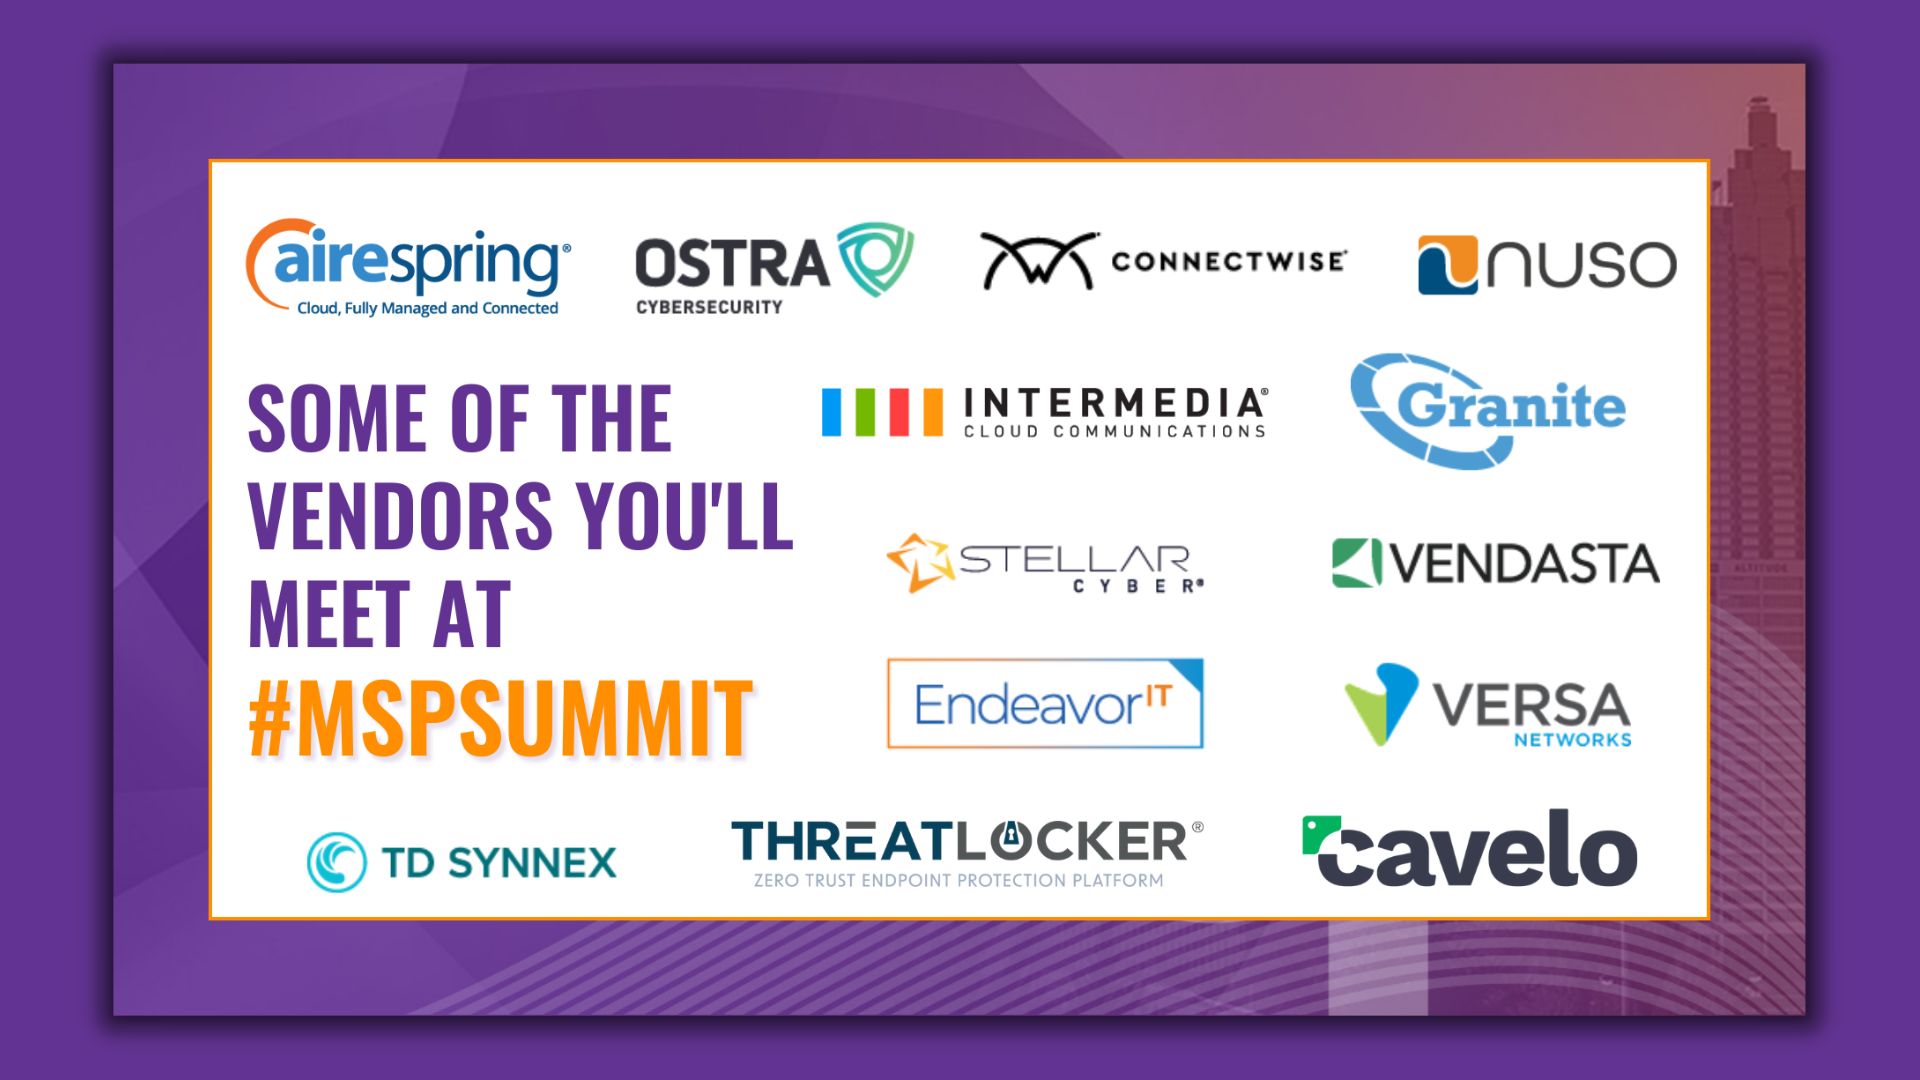 Some of the vendors you'll meet at #MSPSummit. AireSpring, Ostra Cybersecurity, Connectwise, Nuso, Intermedia Cloud Communications, Granite, Stellar Cyber, Vendasta, Endeavor IT, Versa Networks, TD Synnex, Threatlocker, and Cavelo